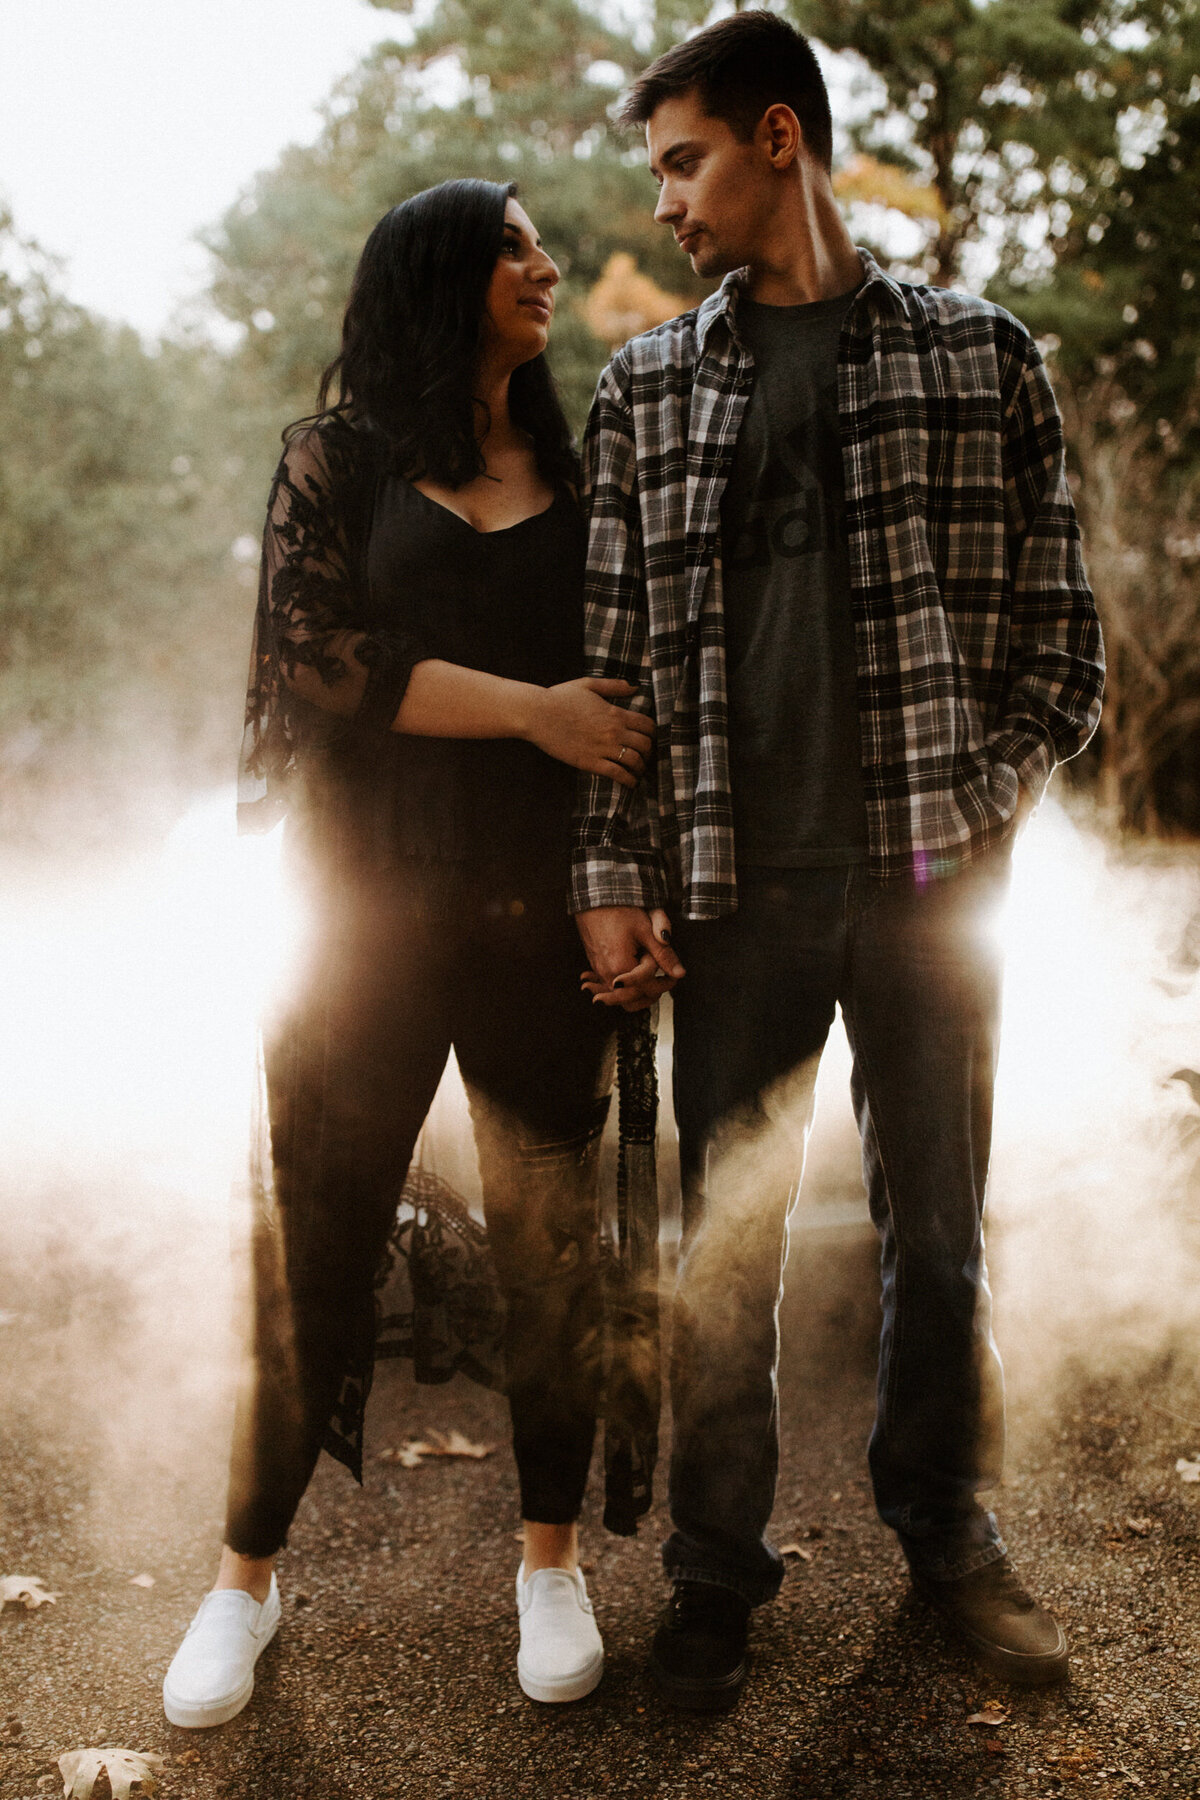 Guy wearing black Vans and a grey flannel holding hands with a girl wearing all black while they look at each other and stand in front of a car with headlights shining through the fog